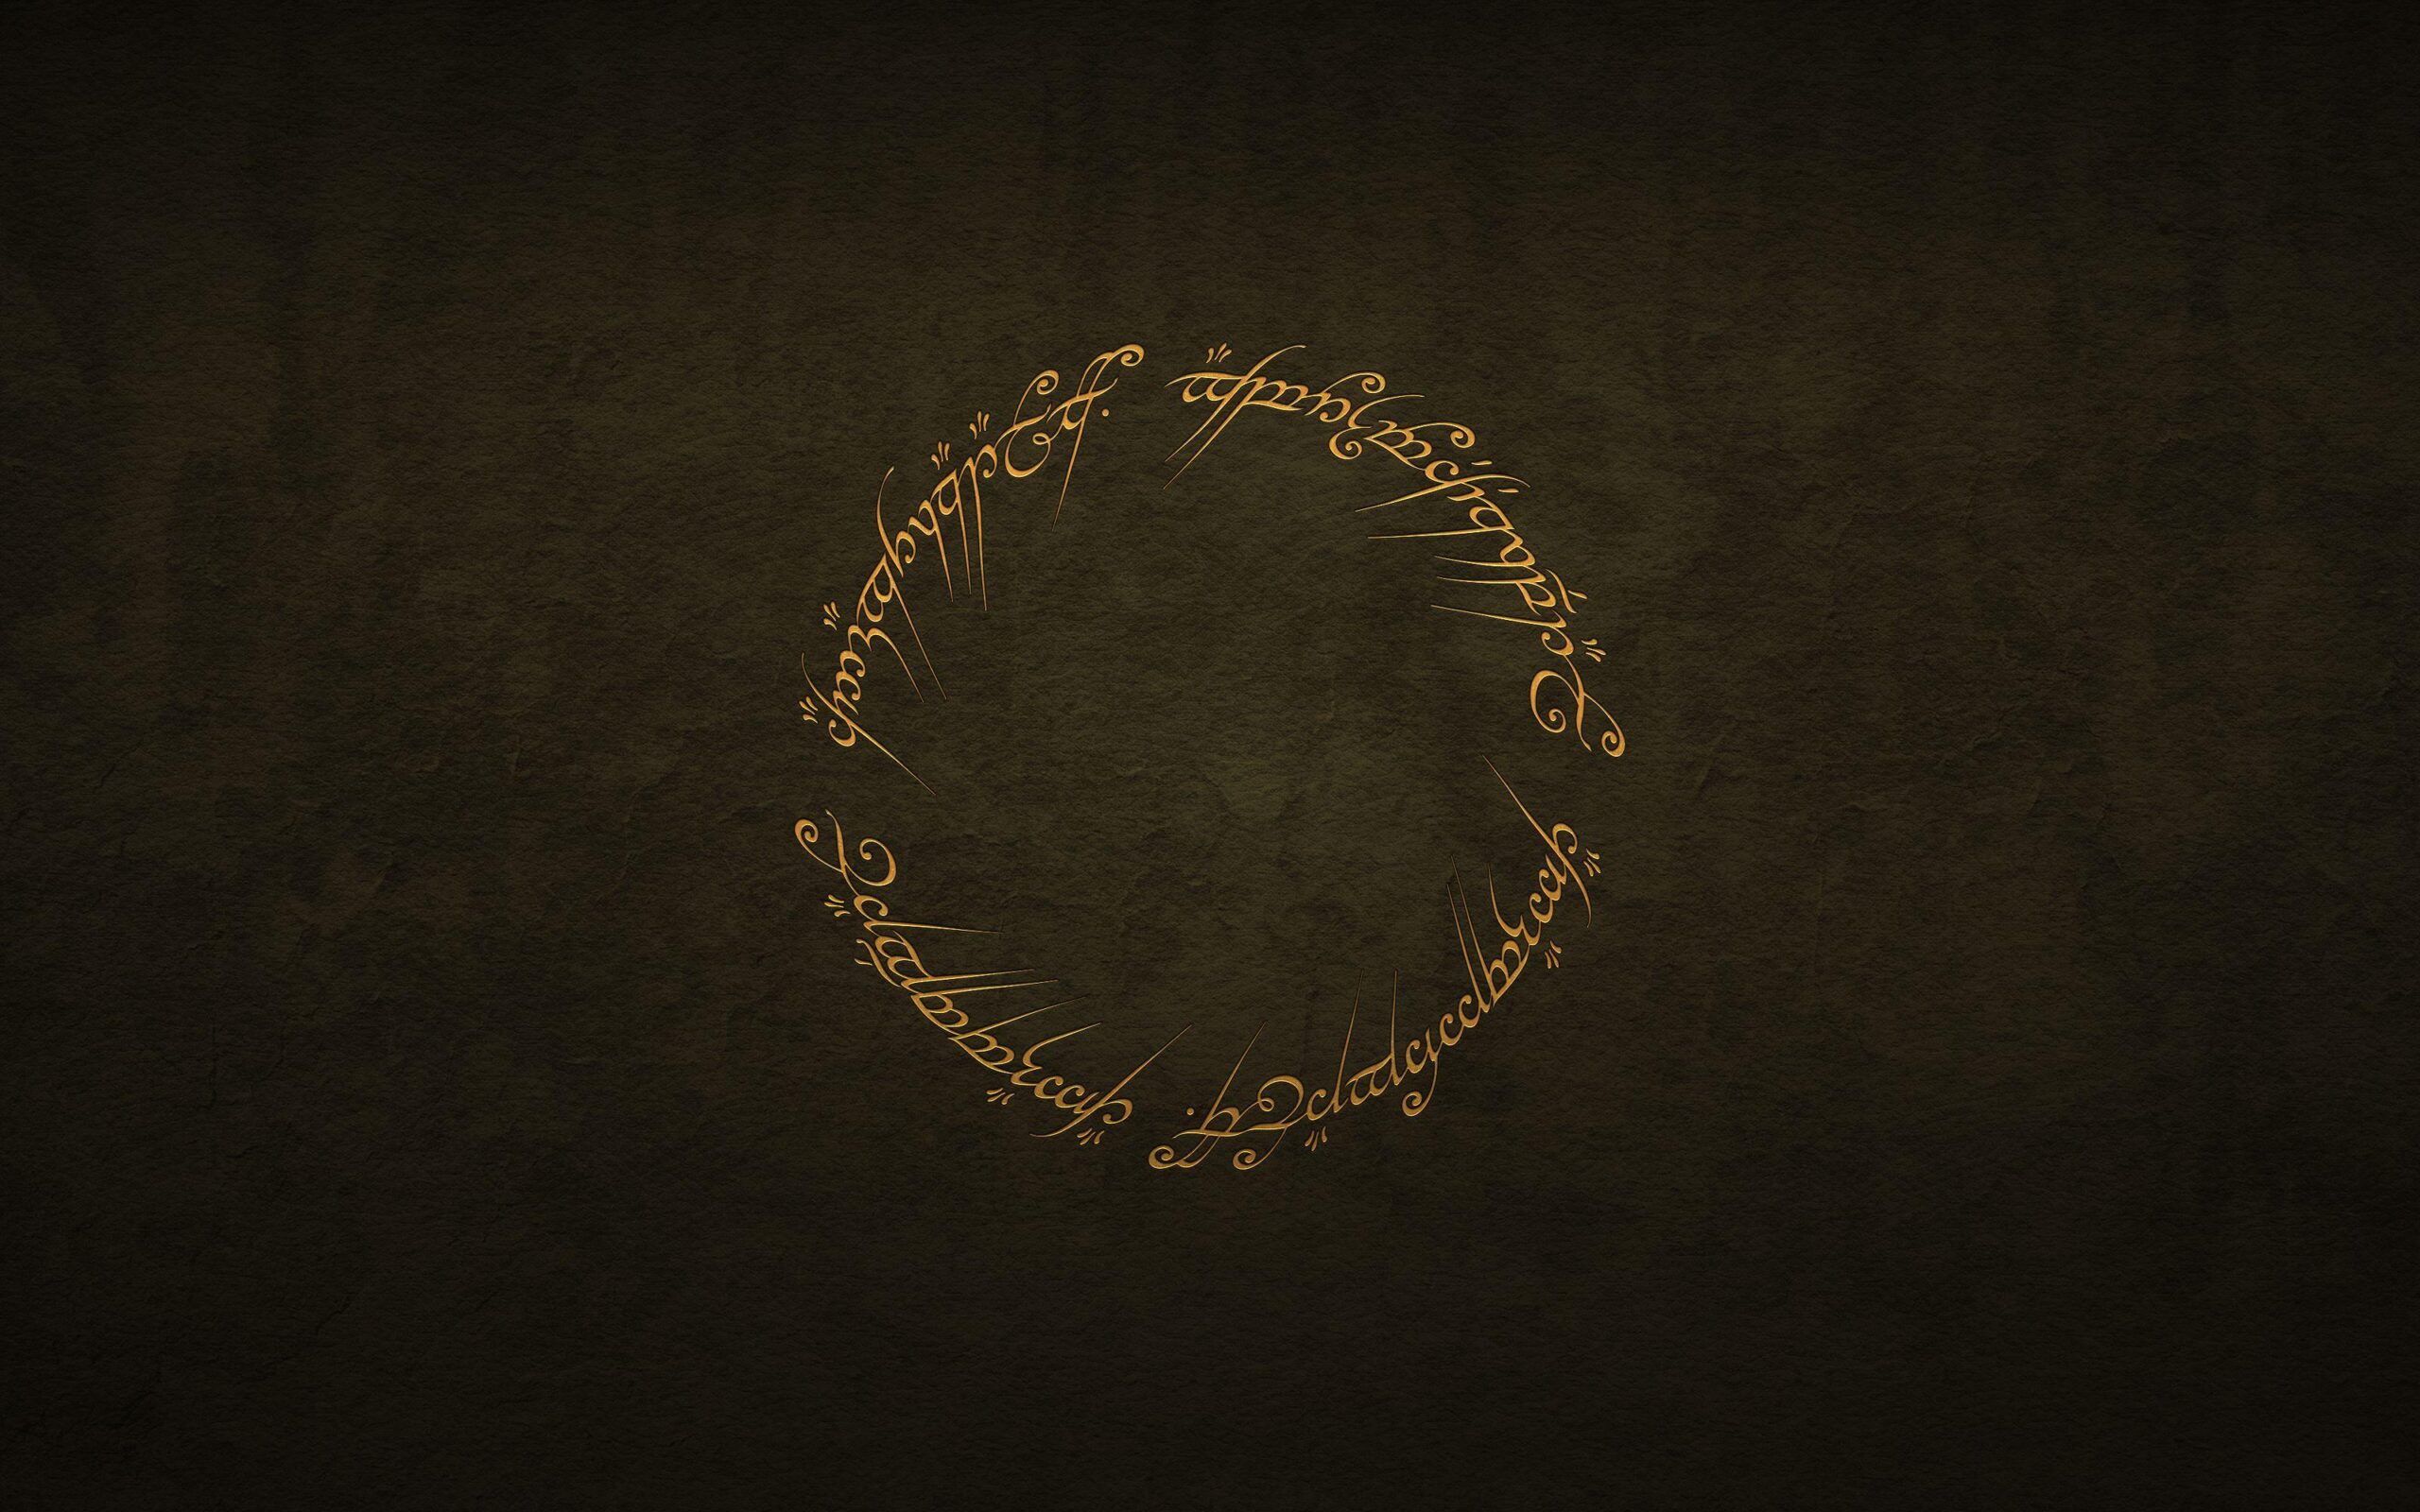 The Lord of the Rings The Fellowship of the Ring Wallpapers